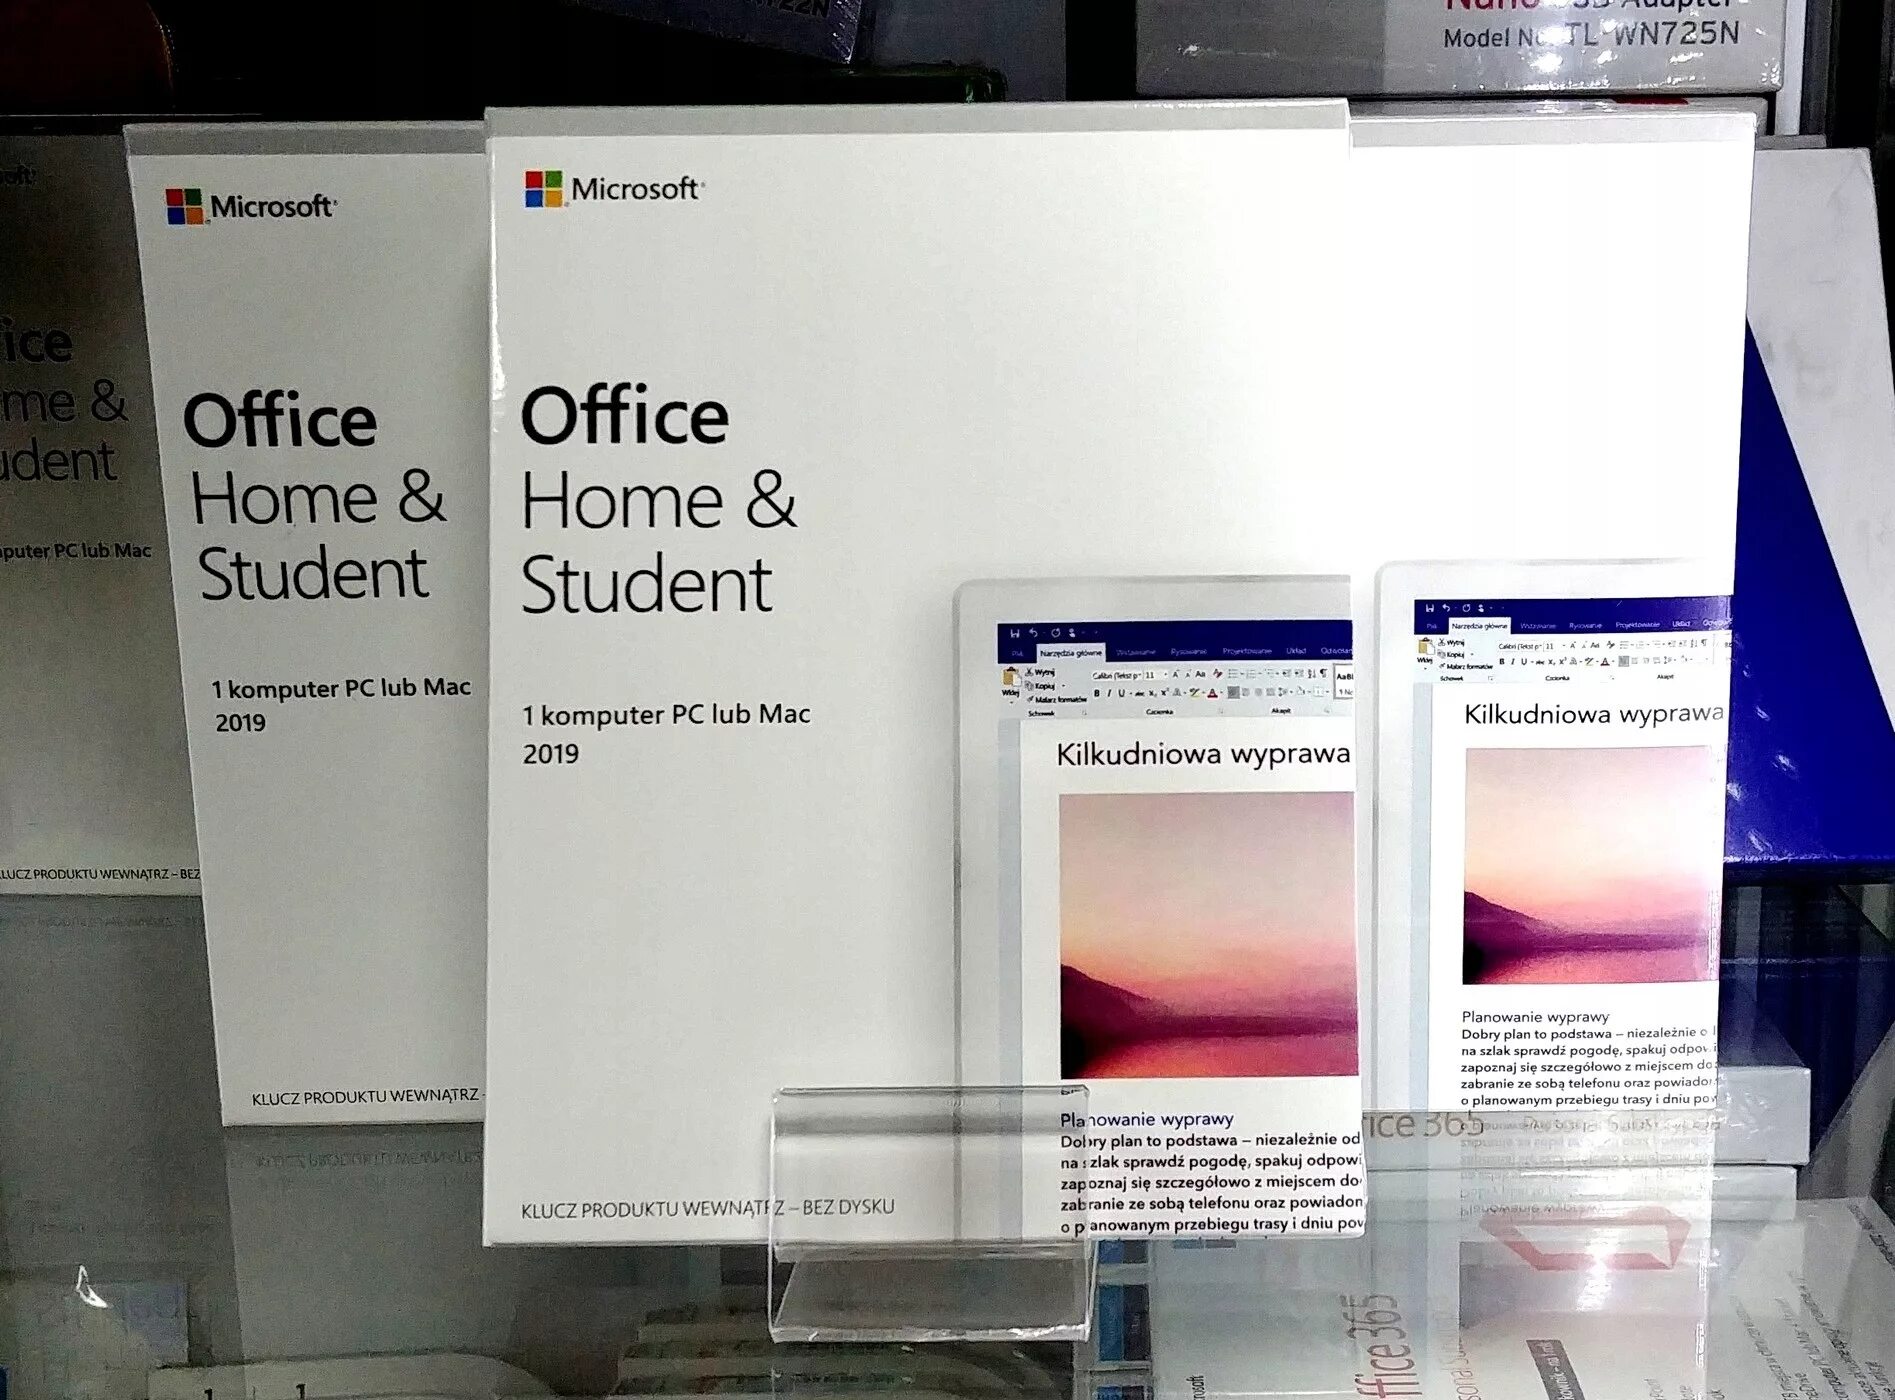 Office 2019 Home and student. Office для дома и учебы 2019. Office Home and student 2019 Box. Office 2019 Box.